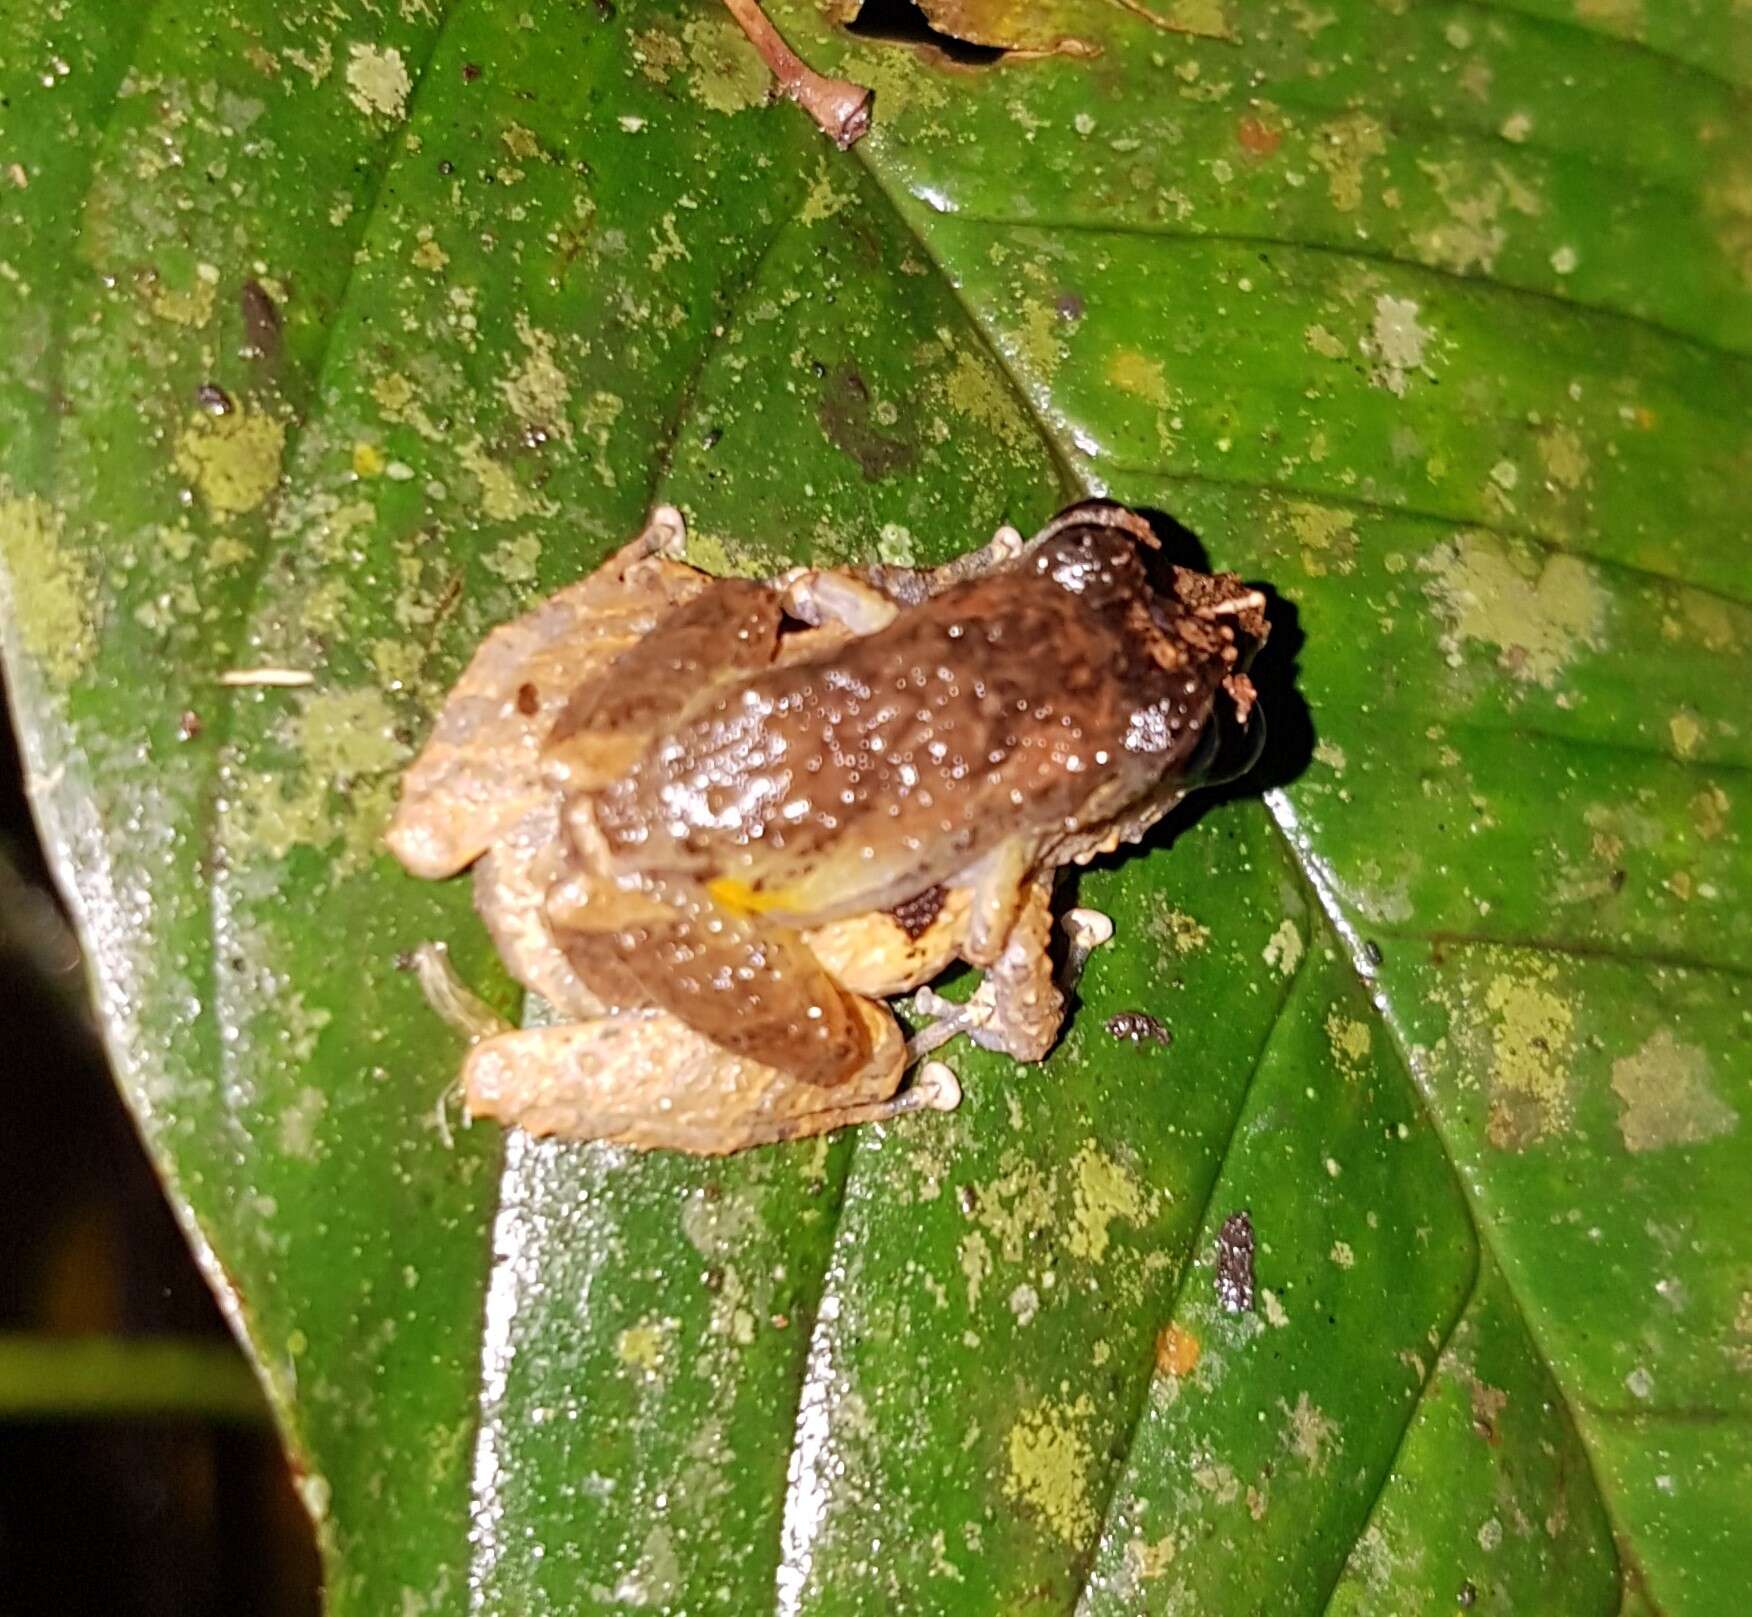 Image of white-striped robber frog